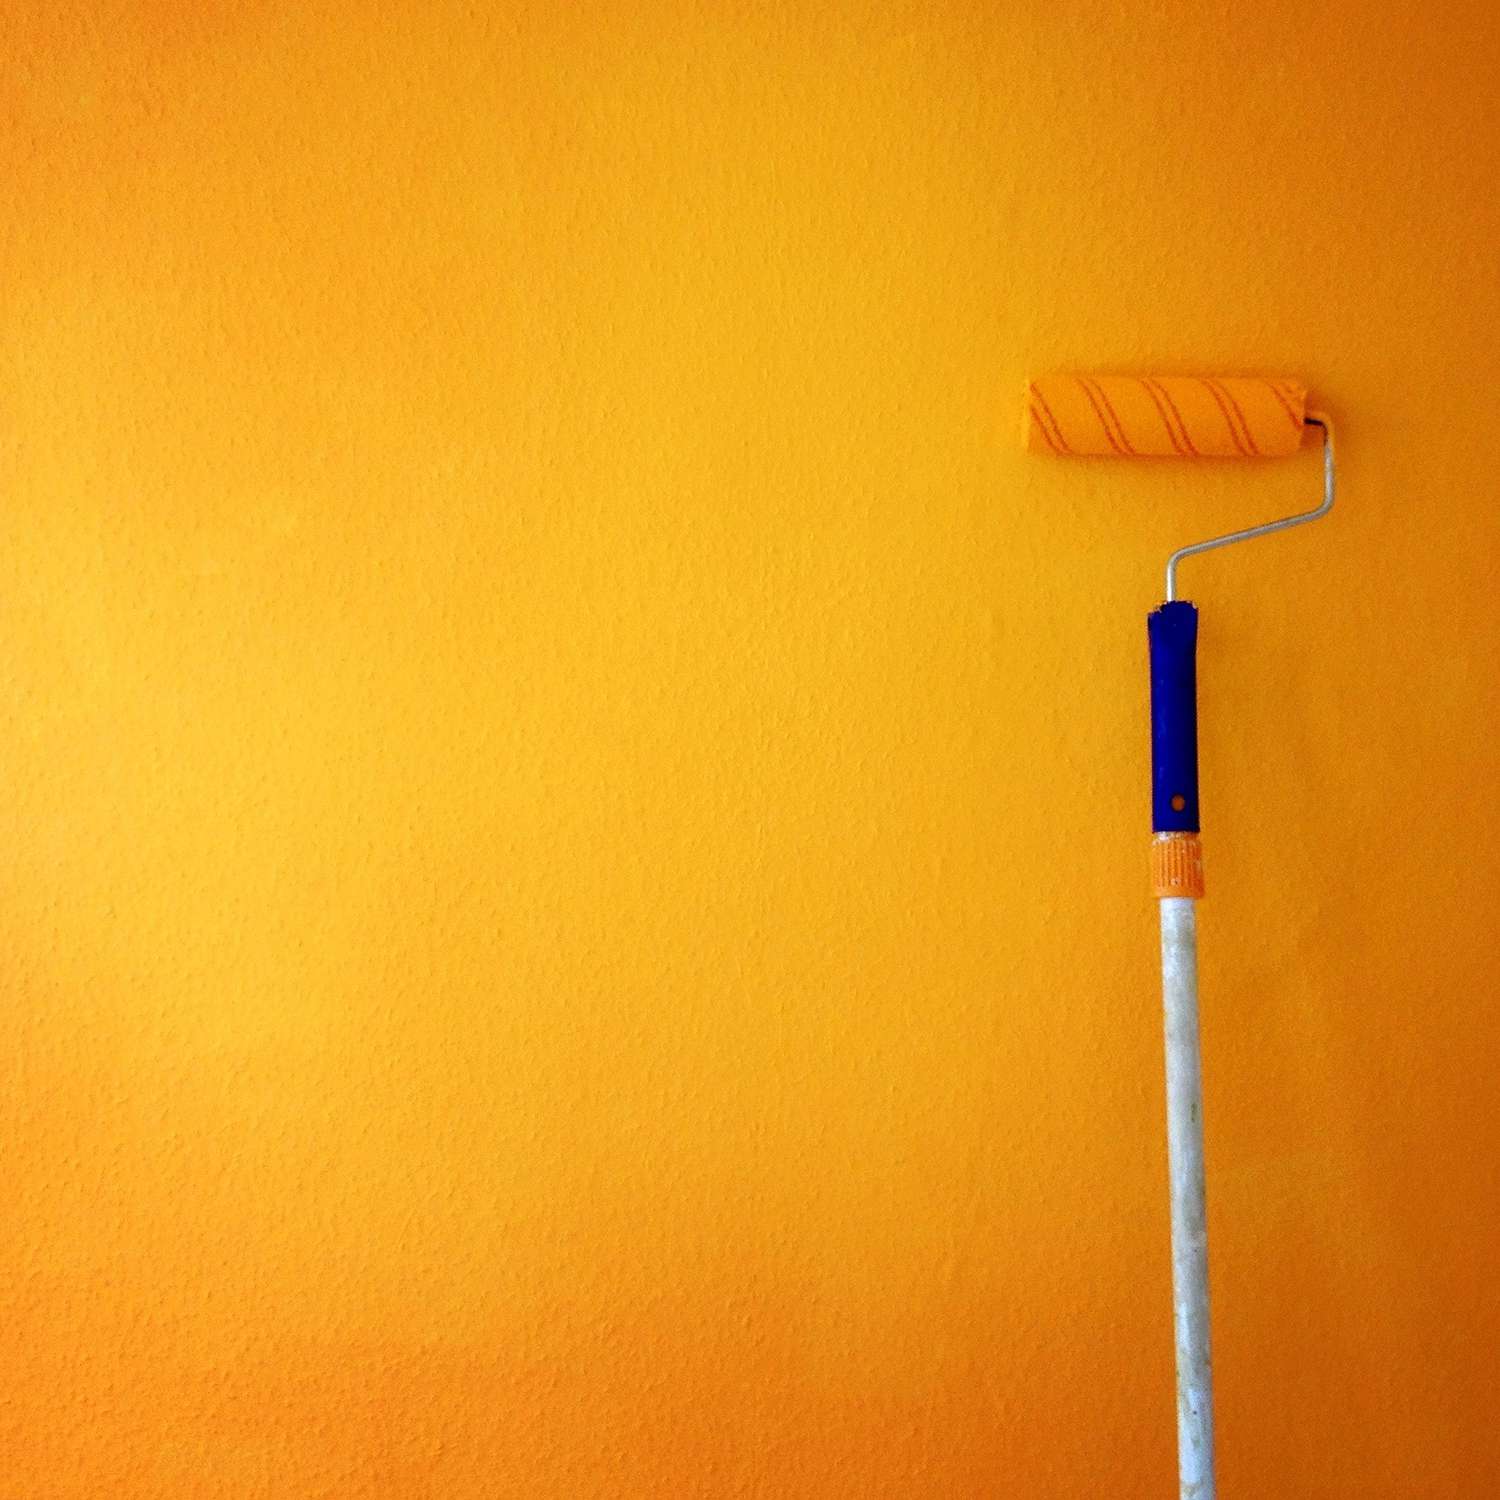 Paint roller leaning on yellow-orange accent wall